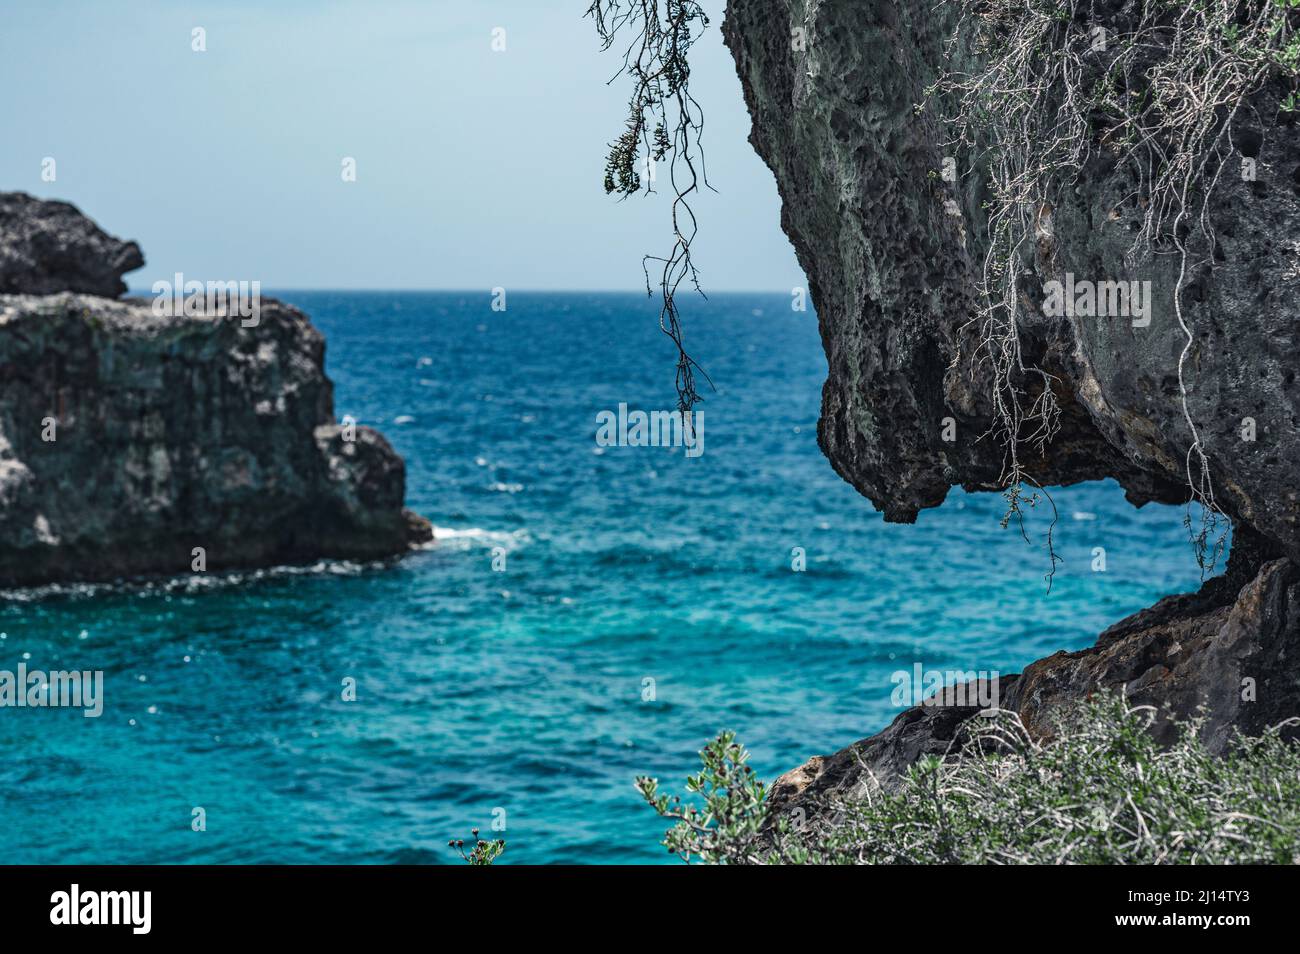 The photo shows the Atlantic Ocean with a rocky coast. The exotic island's beach contains many rocks and grottoes. The rocky landscape and the sea are Stock Photo